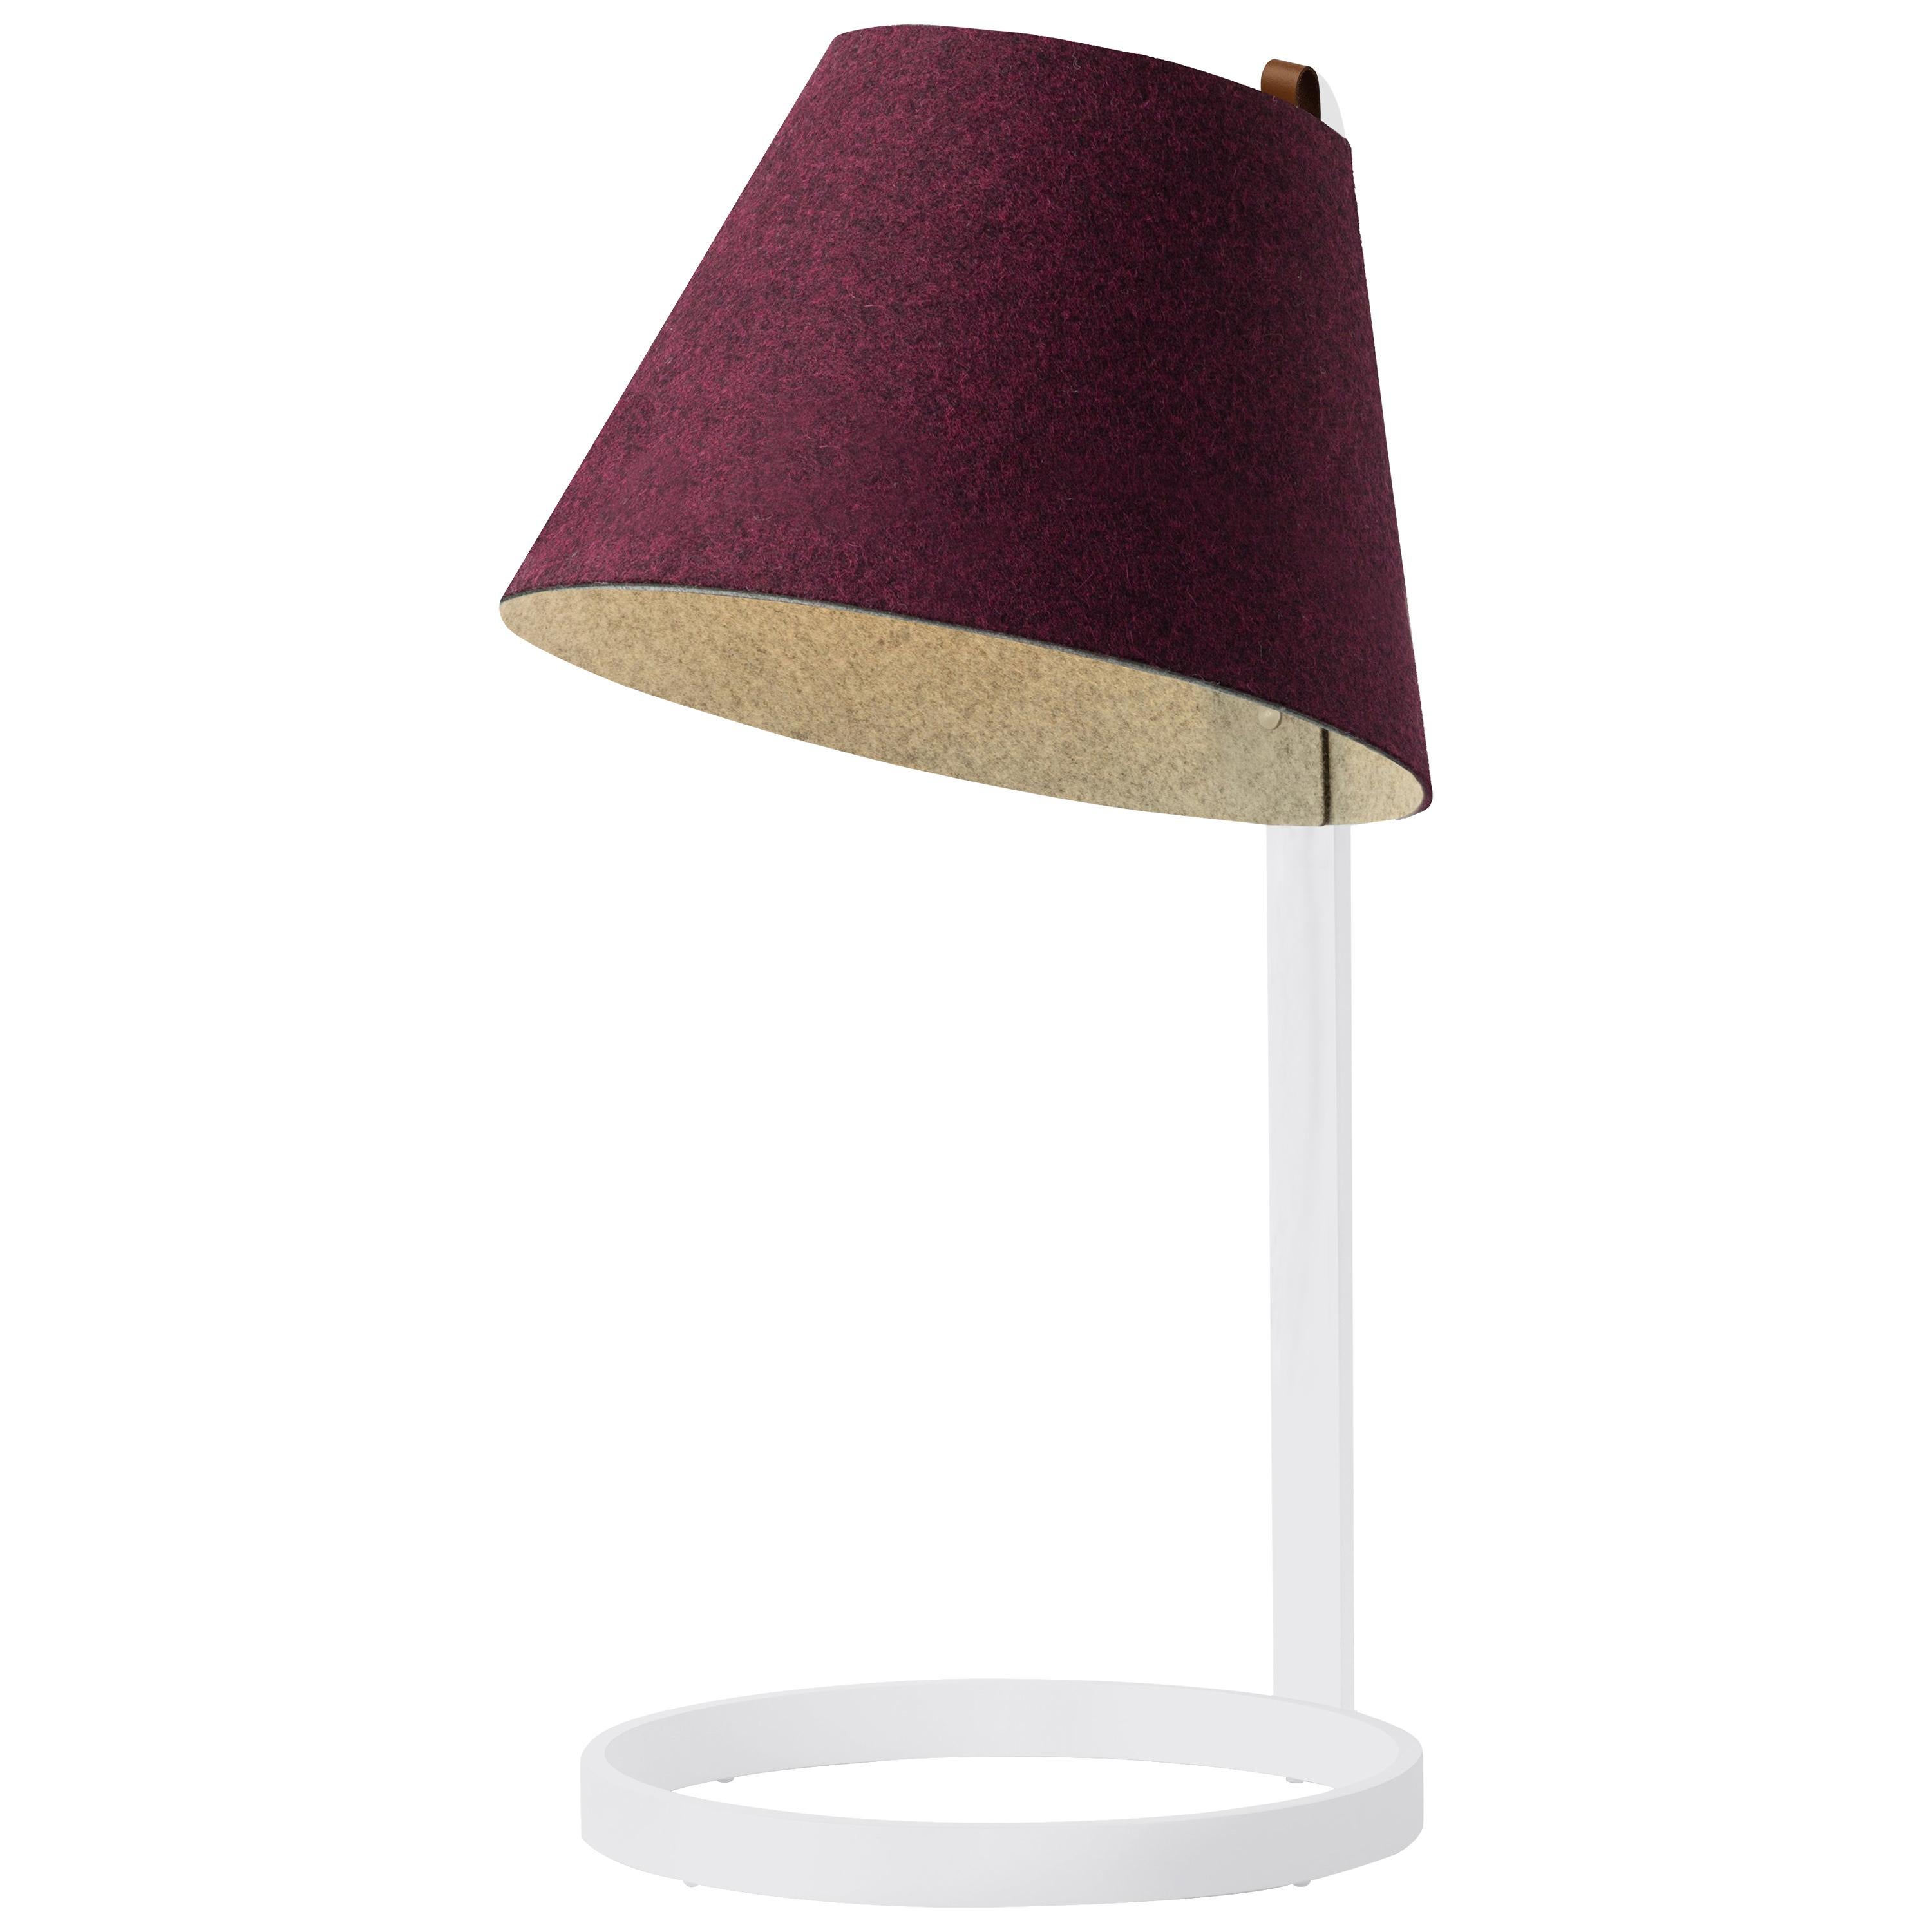 Lana Large Table Lamp in Plum & Grey with White Base by Pablo Designs